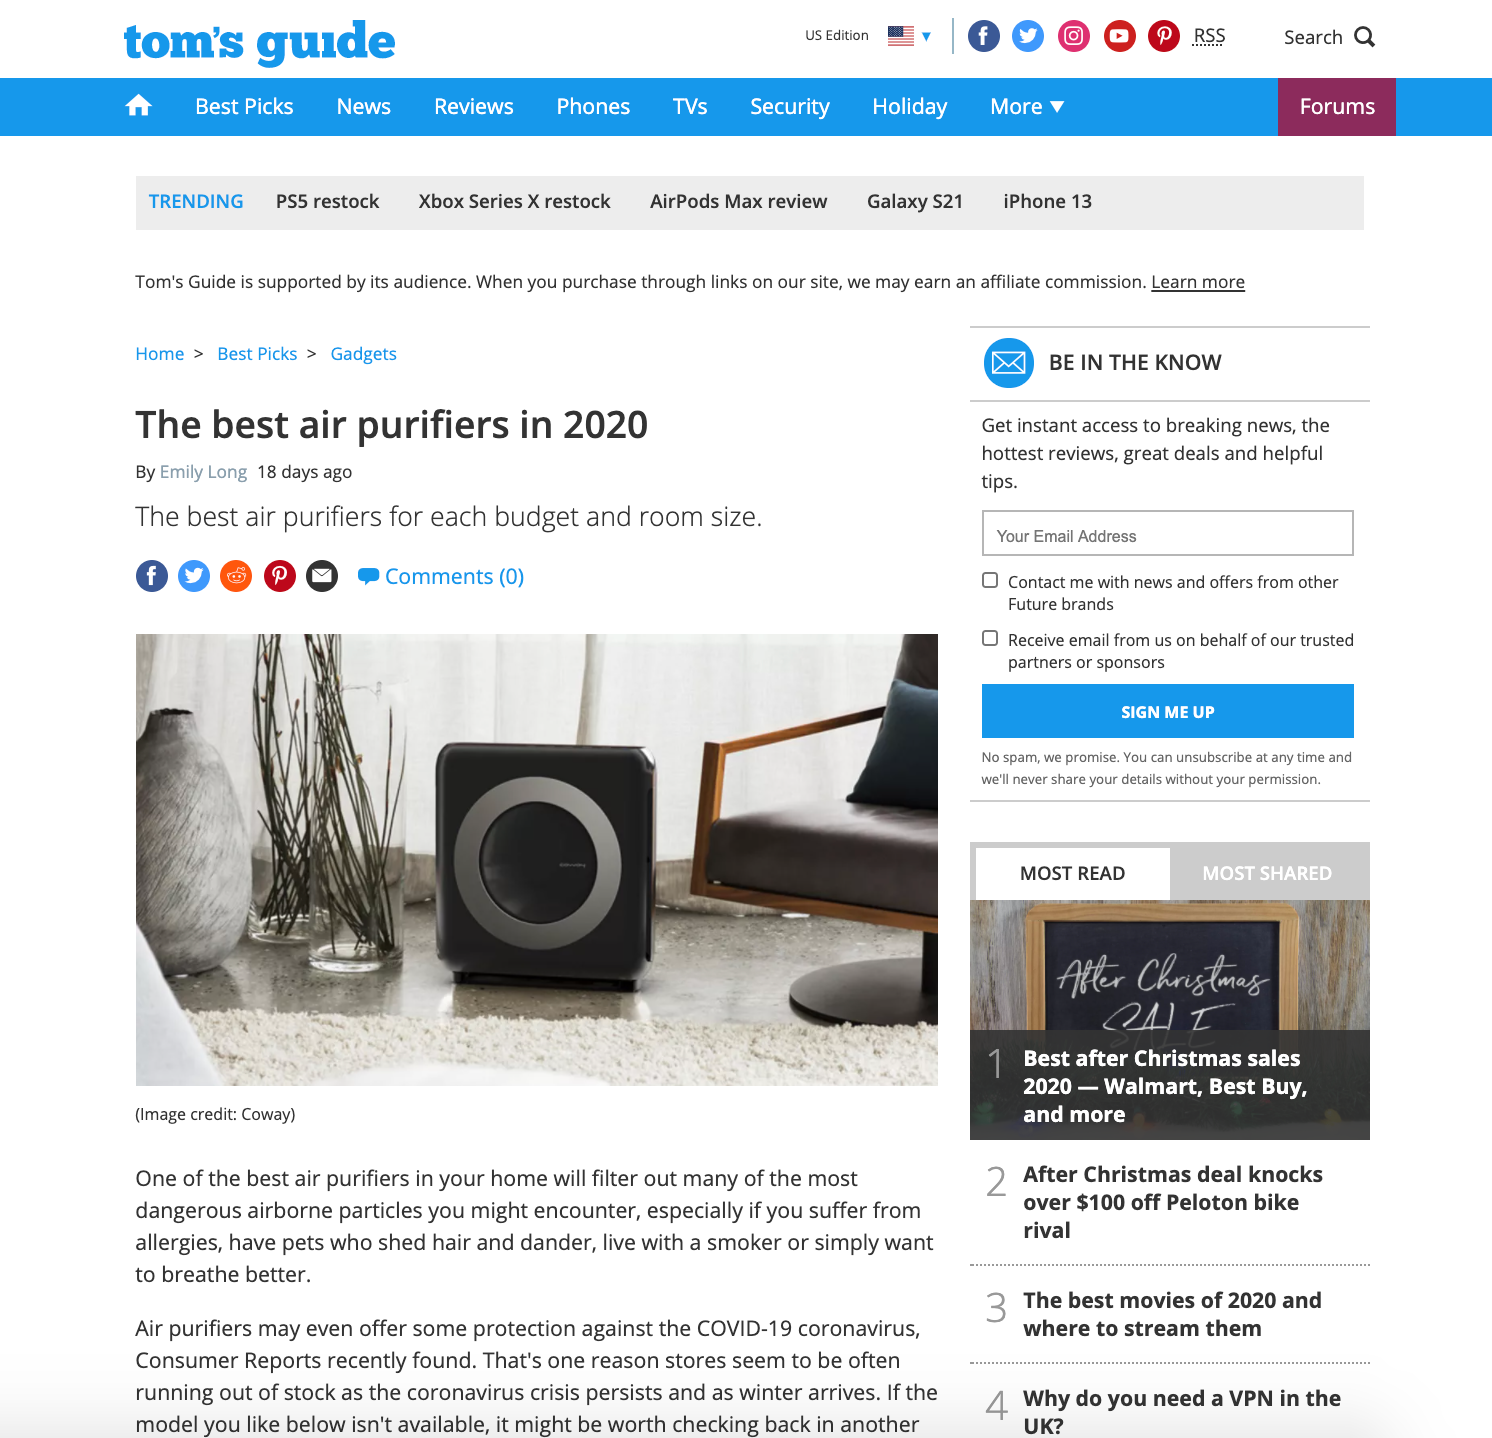 Tom's Guide: The best air purifiers in 2020